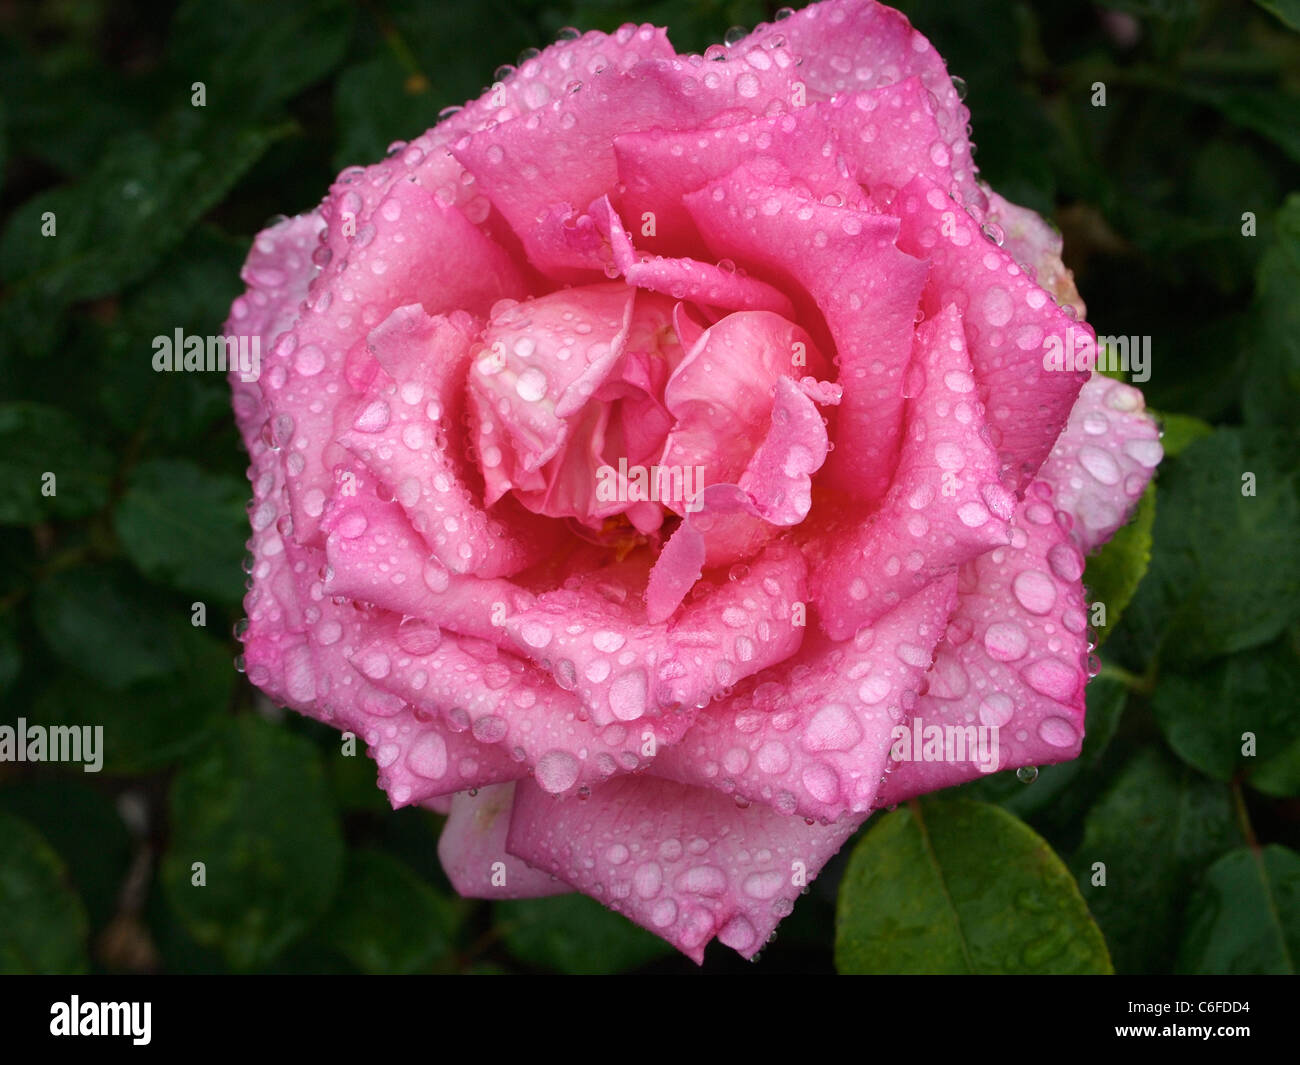 Closeup of pink rose flower with water drops, Loire valley, France Stock Photo